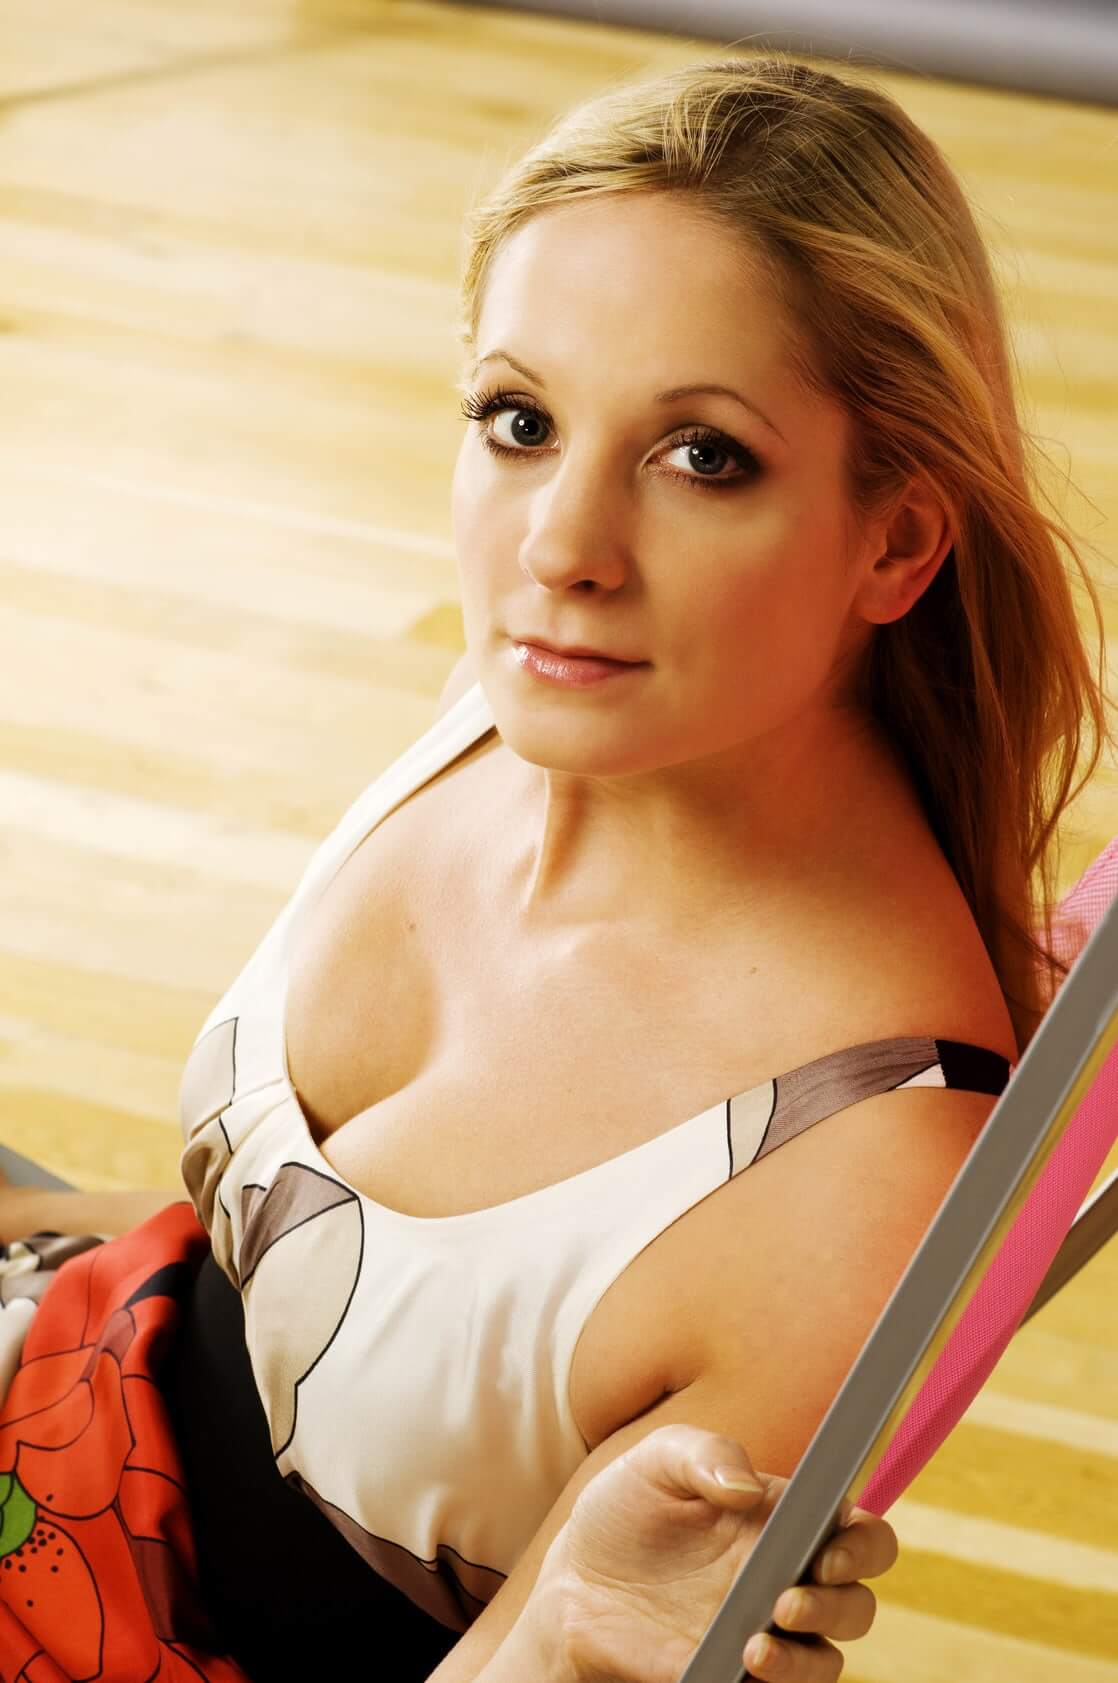 49 Hot Pictures Of Joanne Froggatt Will Hypnotise You With Her Exquisite Body | Best Of Comic Books